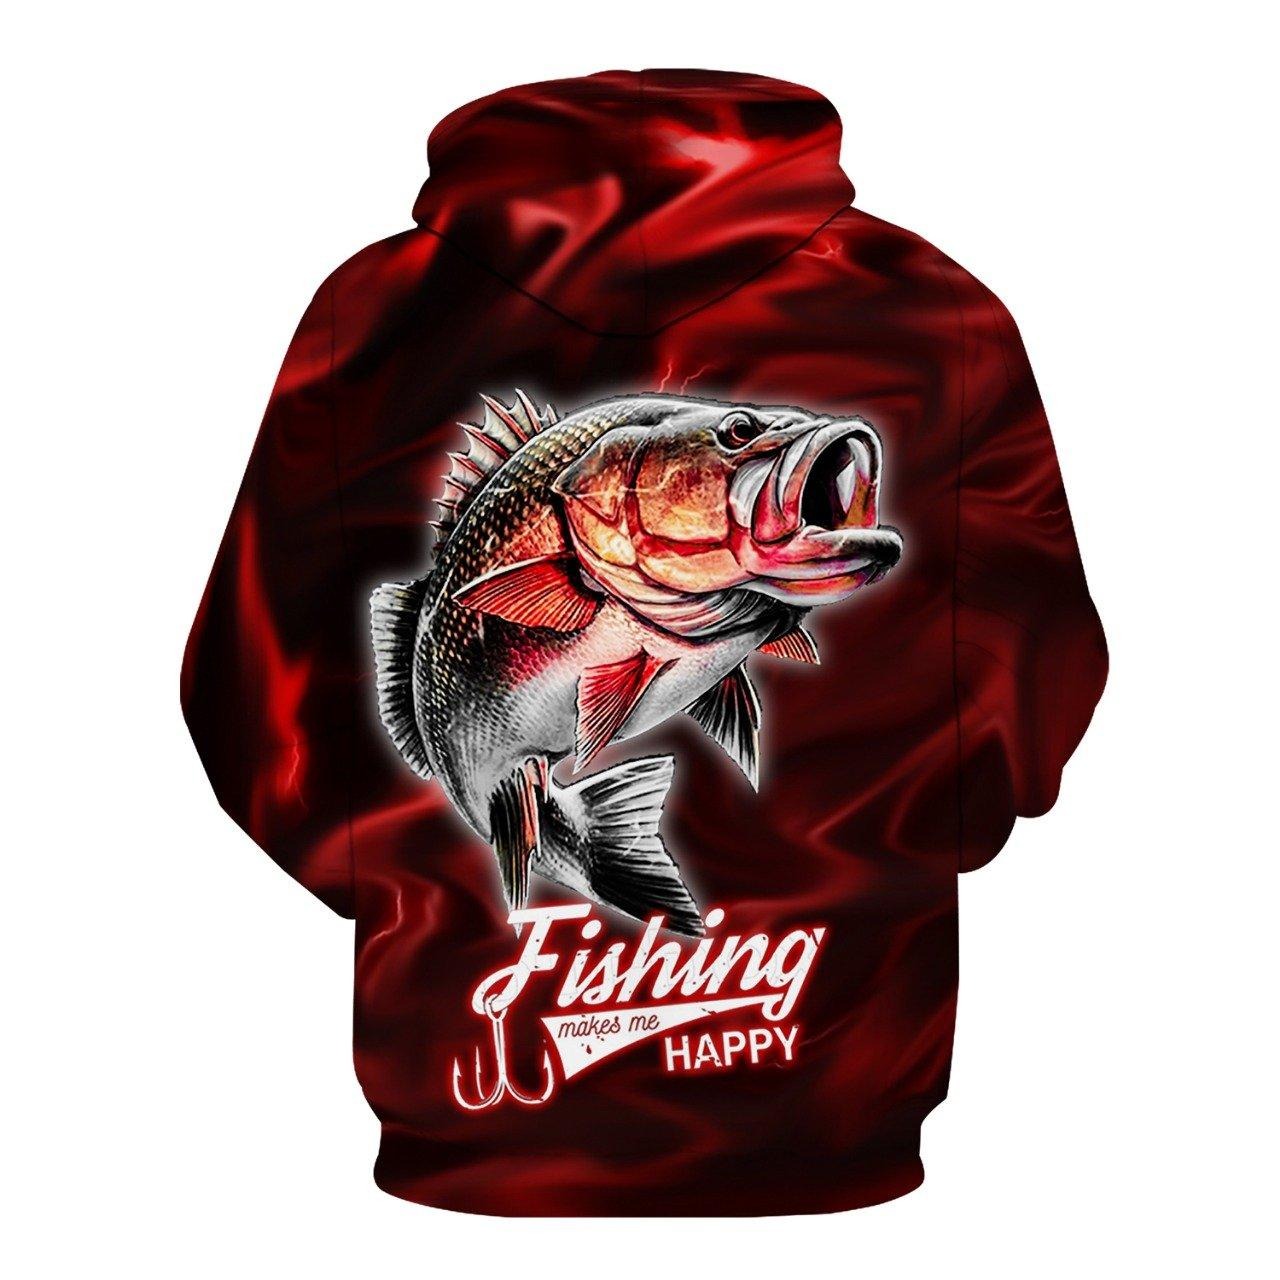 Fishing makes me happy red lighting 3d shirt and hoodie